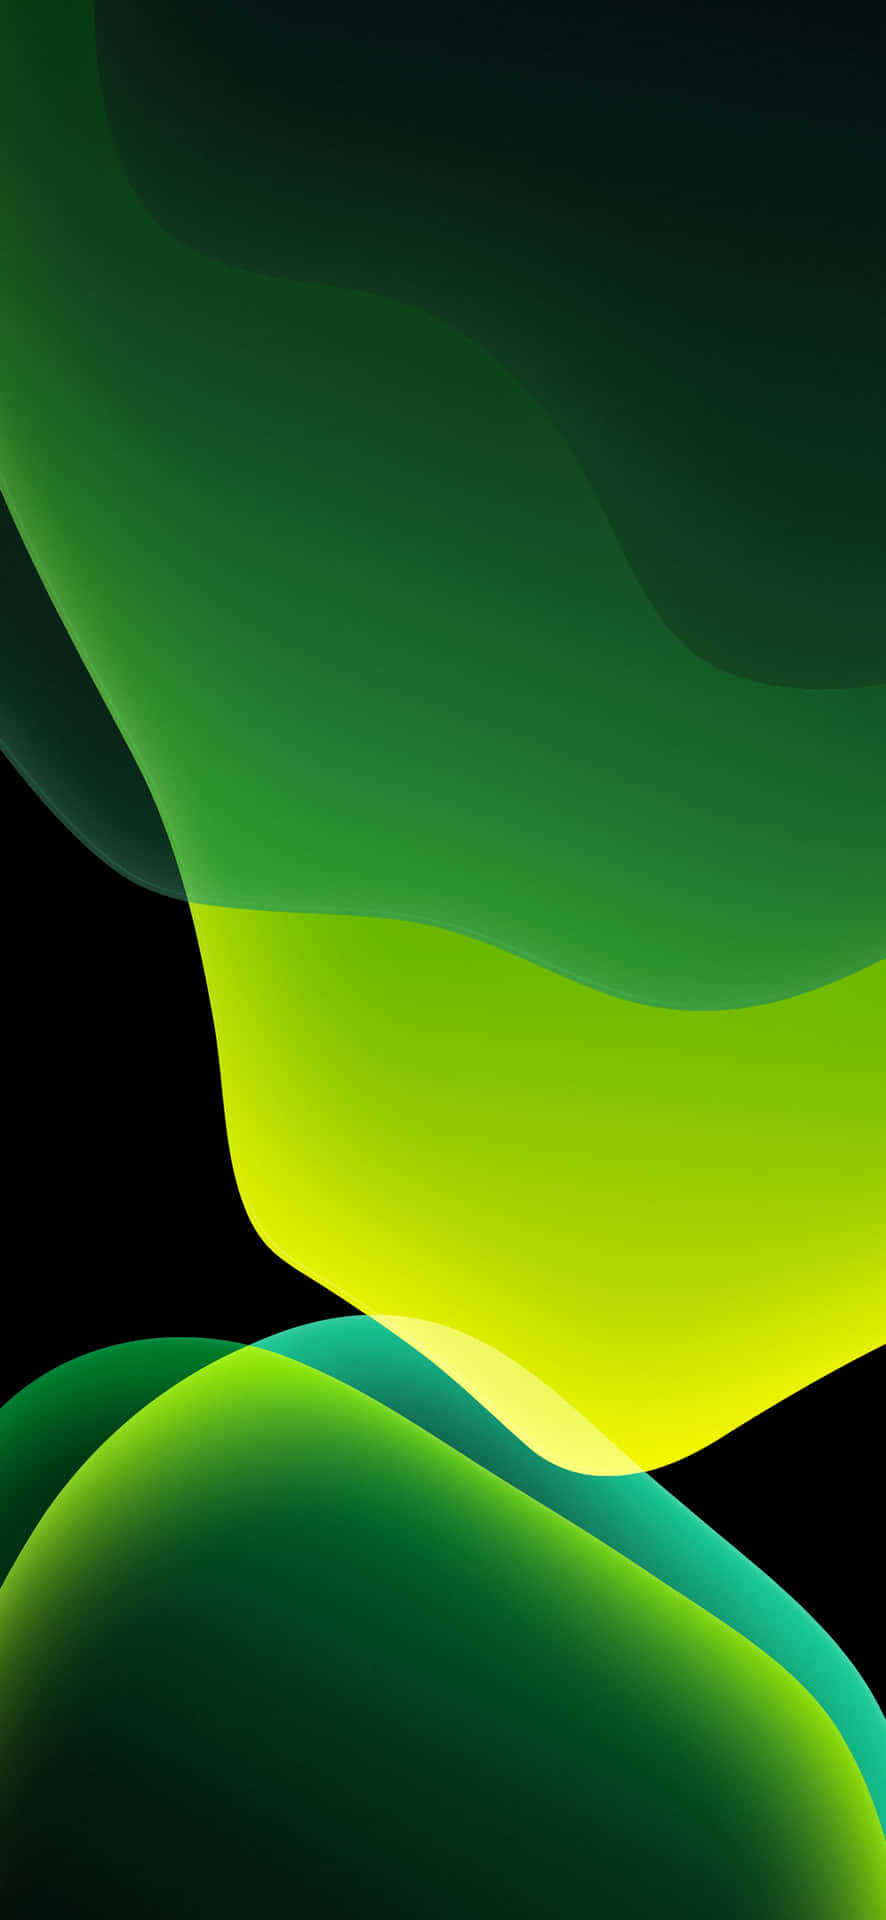 A Green And Black Abstract Background Wallpaper